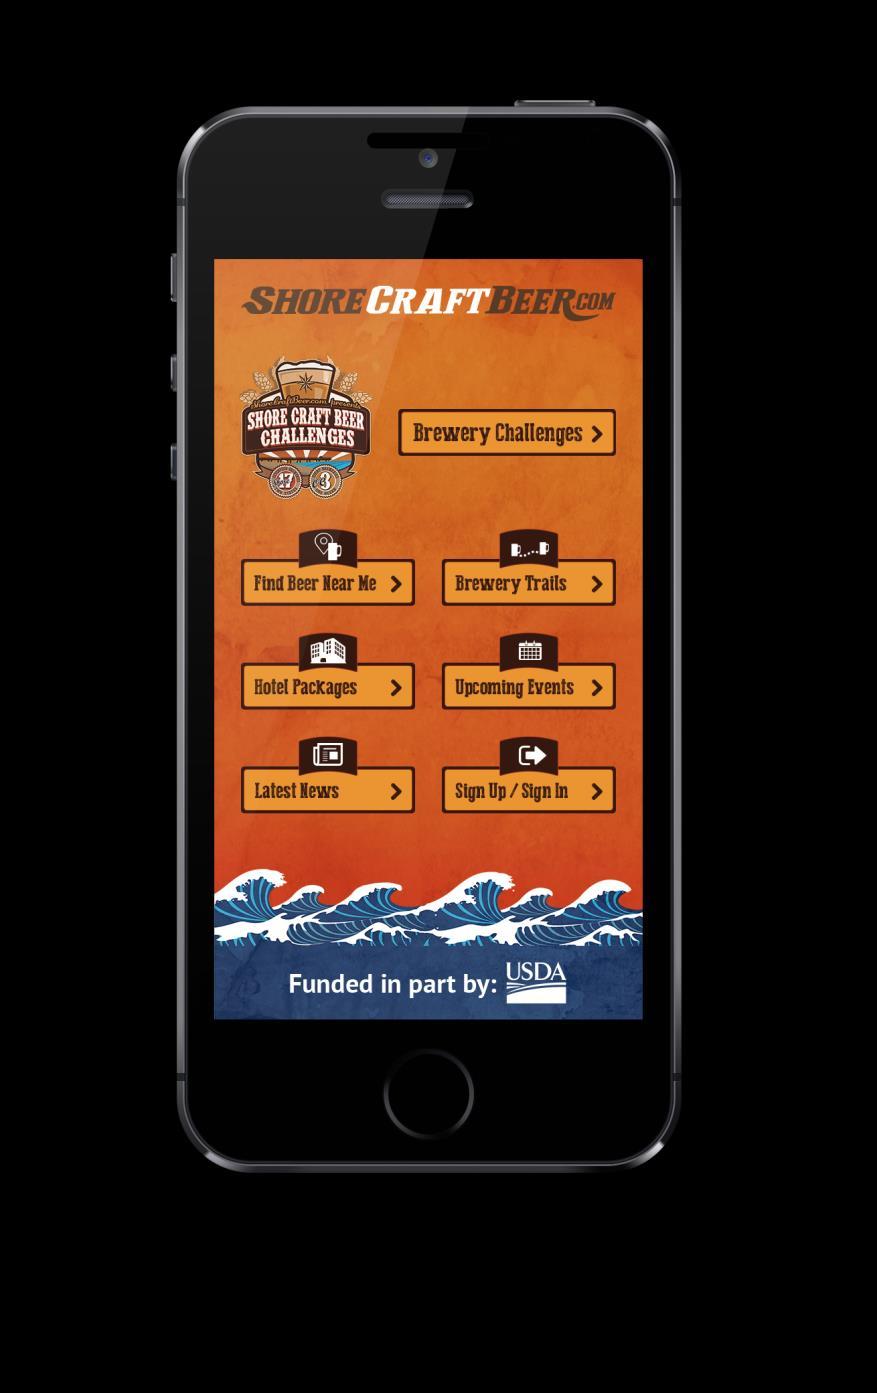 3. USE THE SHORE CRAFT BEER APP FOR YOUR